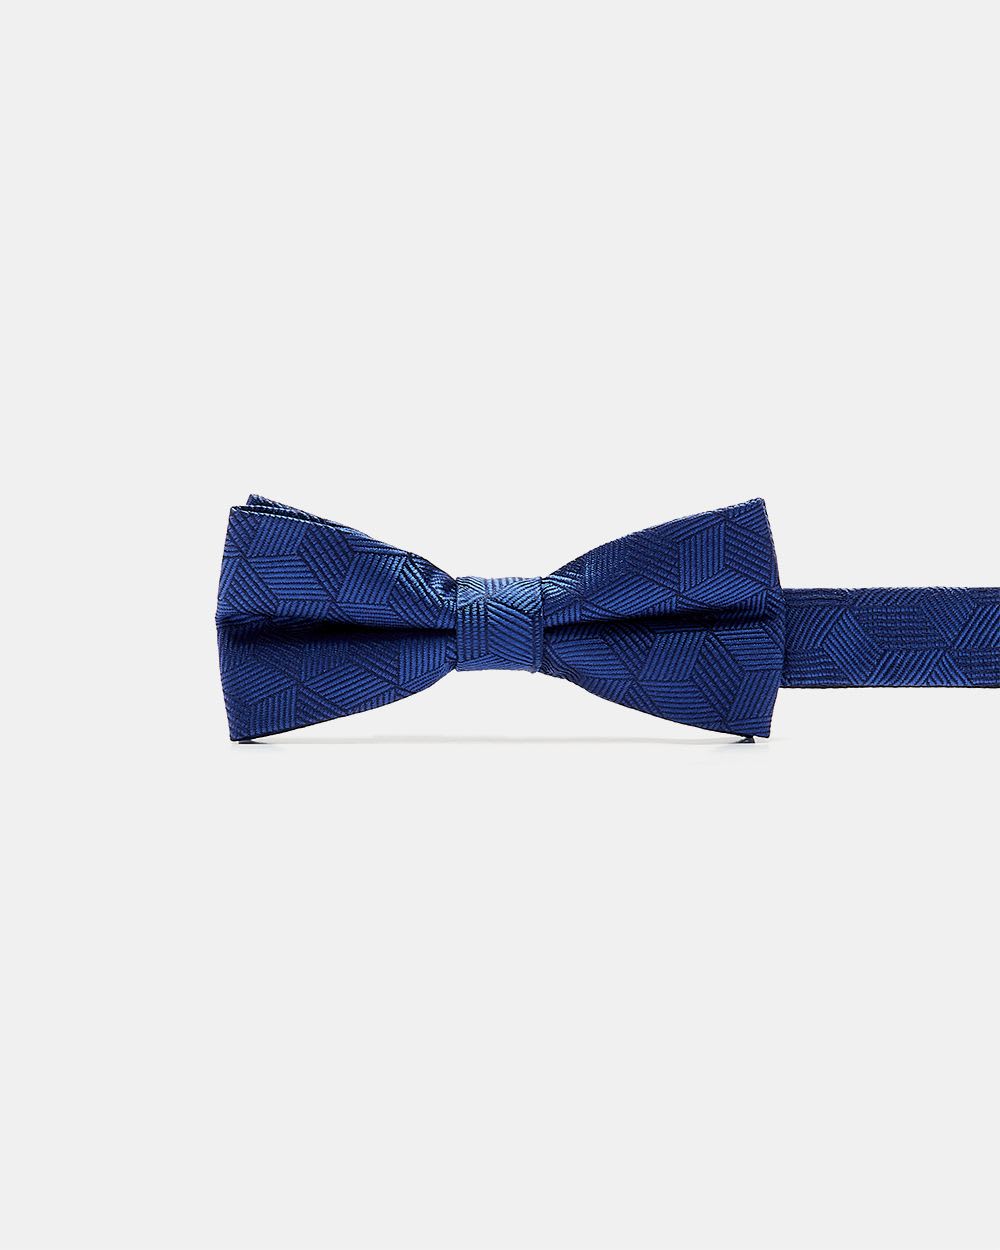 Bright Blue Textured Bow Tie with